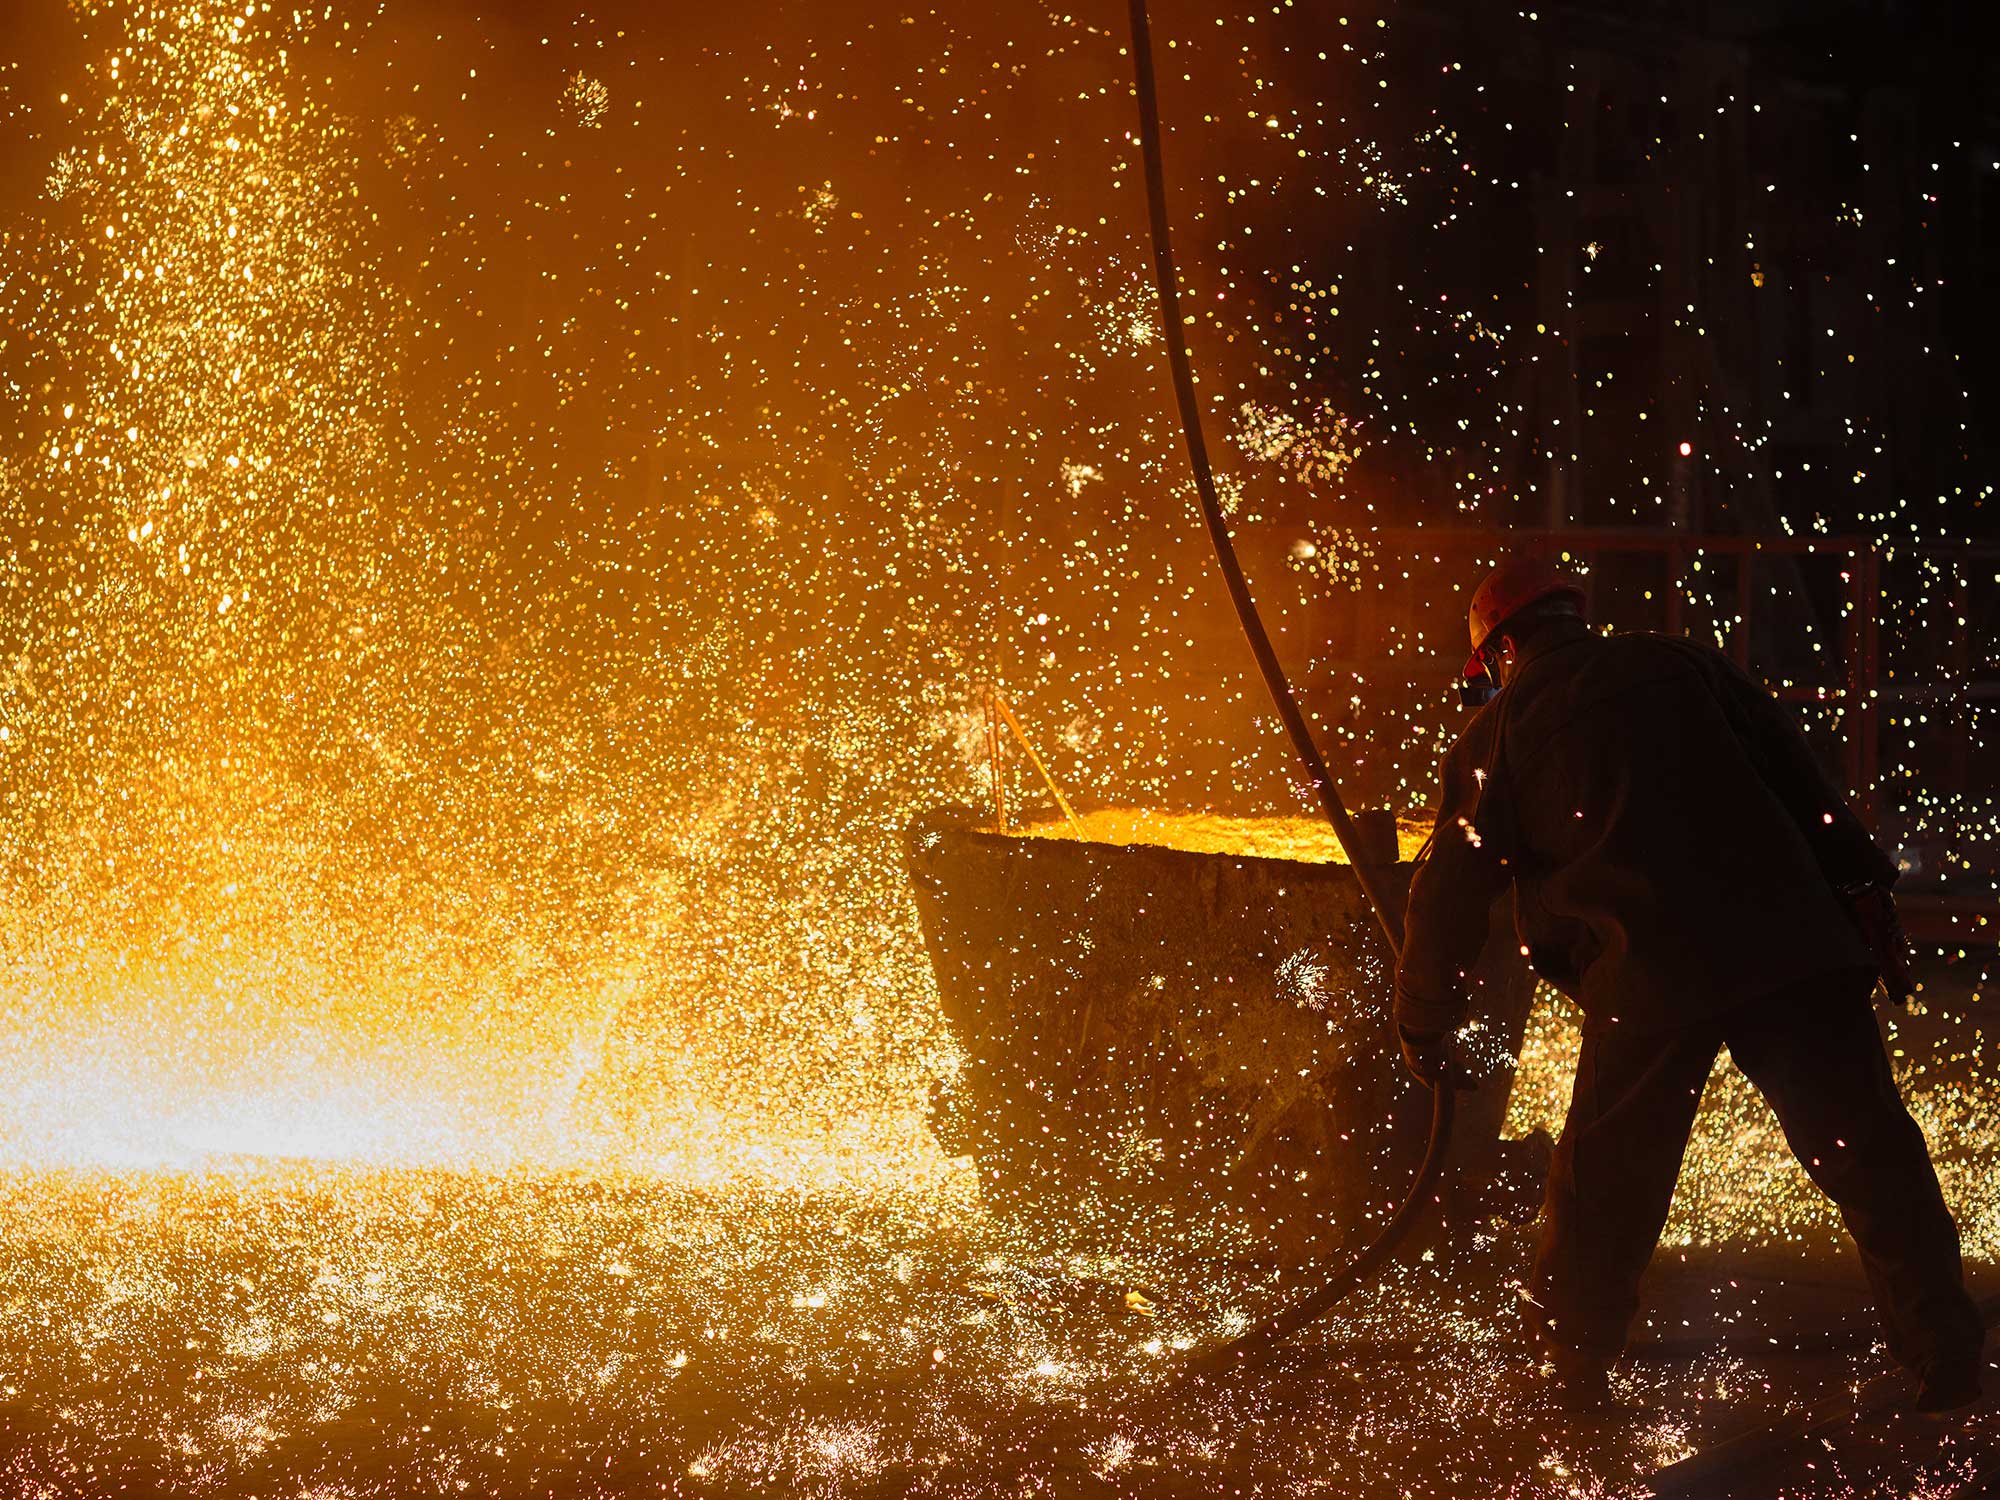 Steelmaking is a major source of emissions. These companies are racing to fix it.